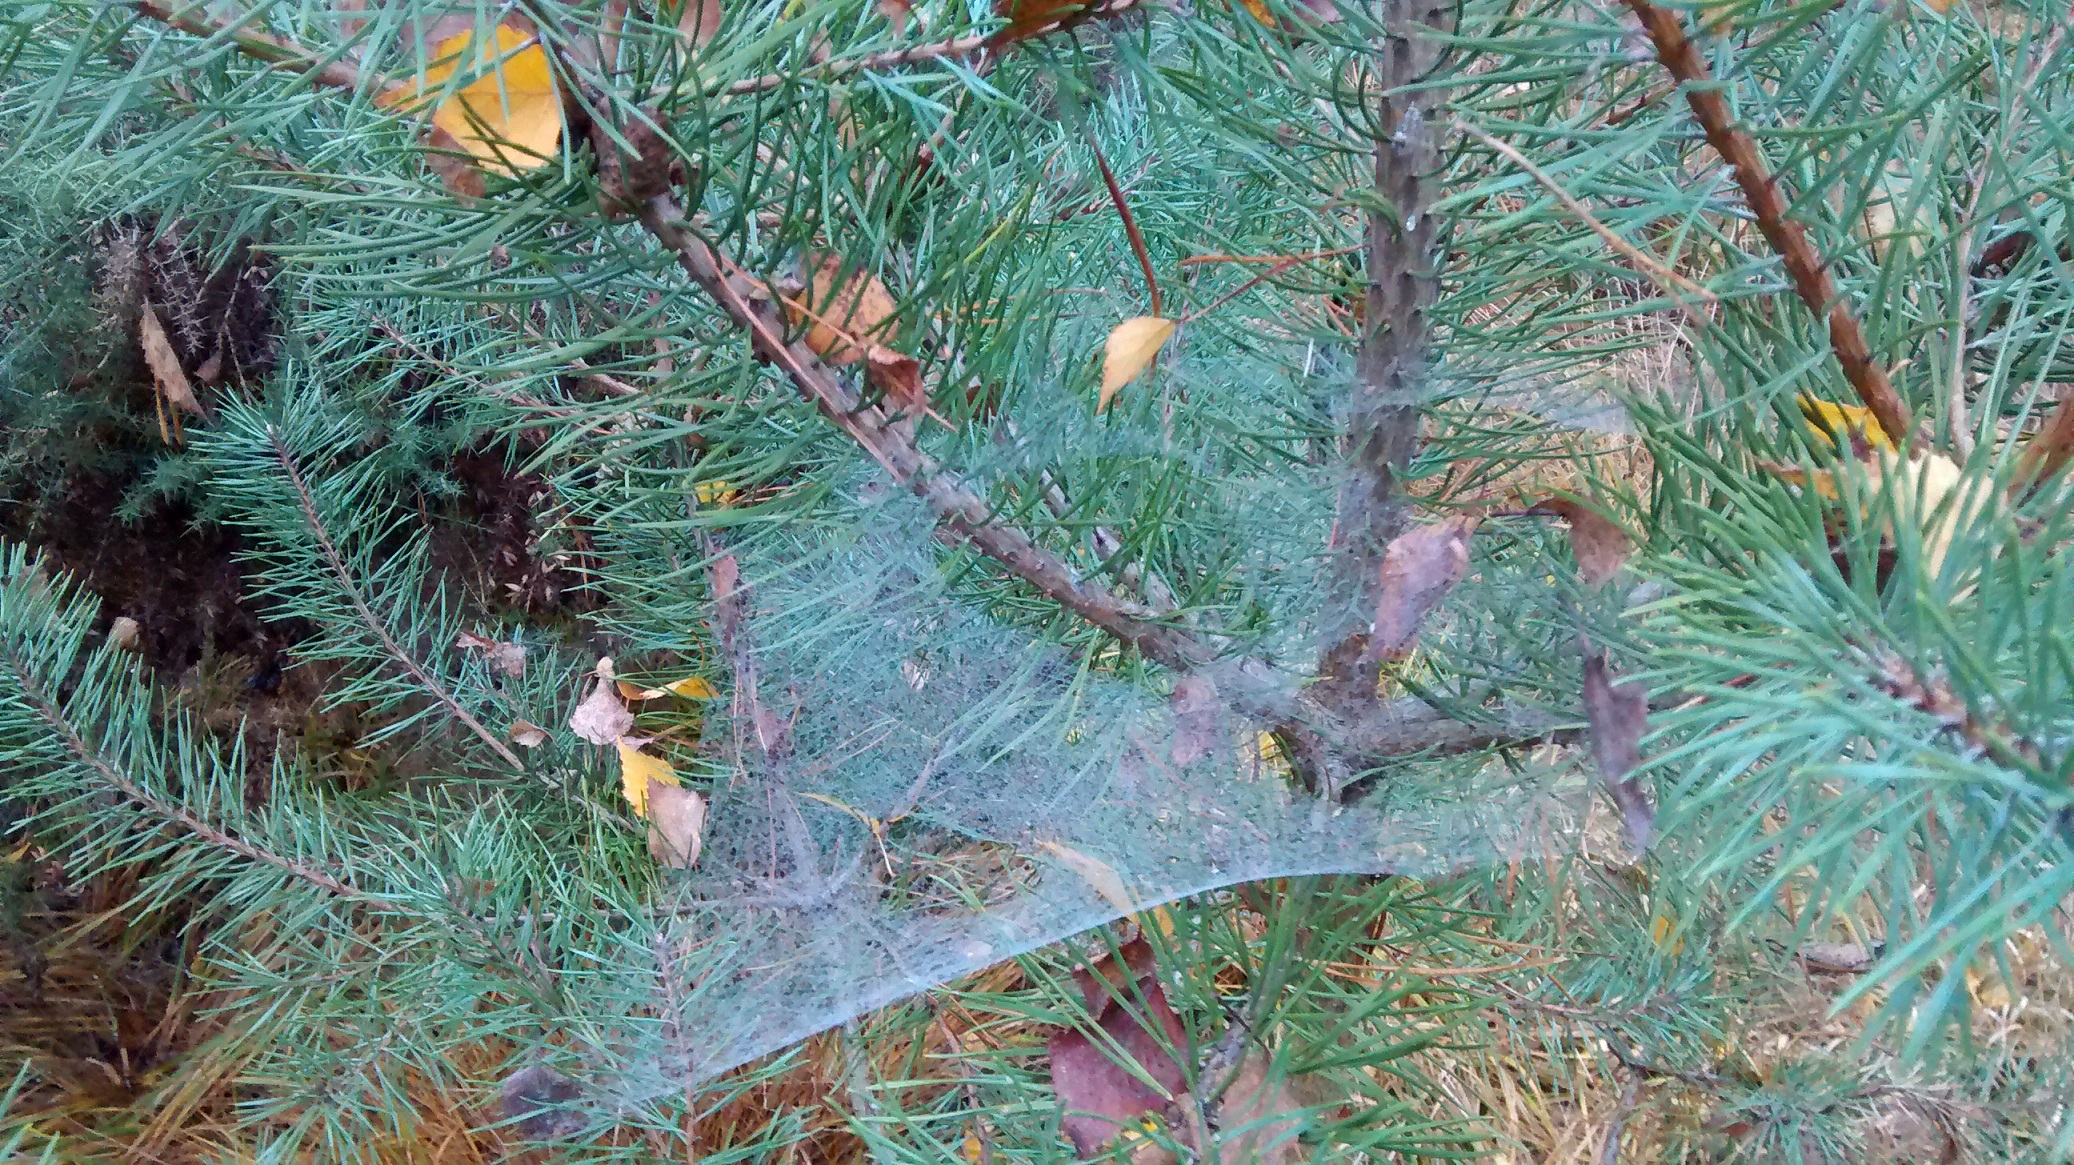 A pine tree on a damp winter day with cobwebs and leaves present